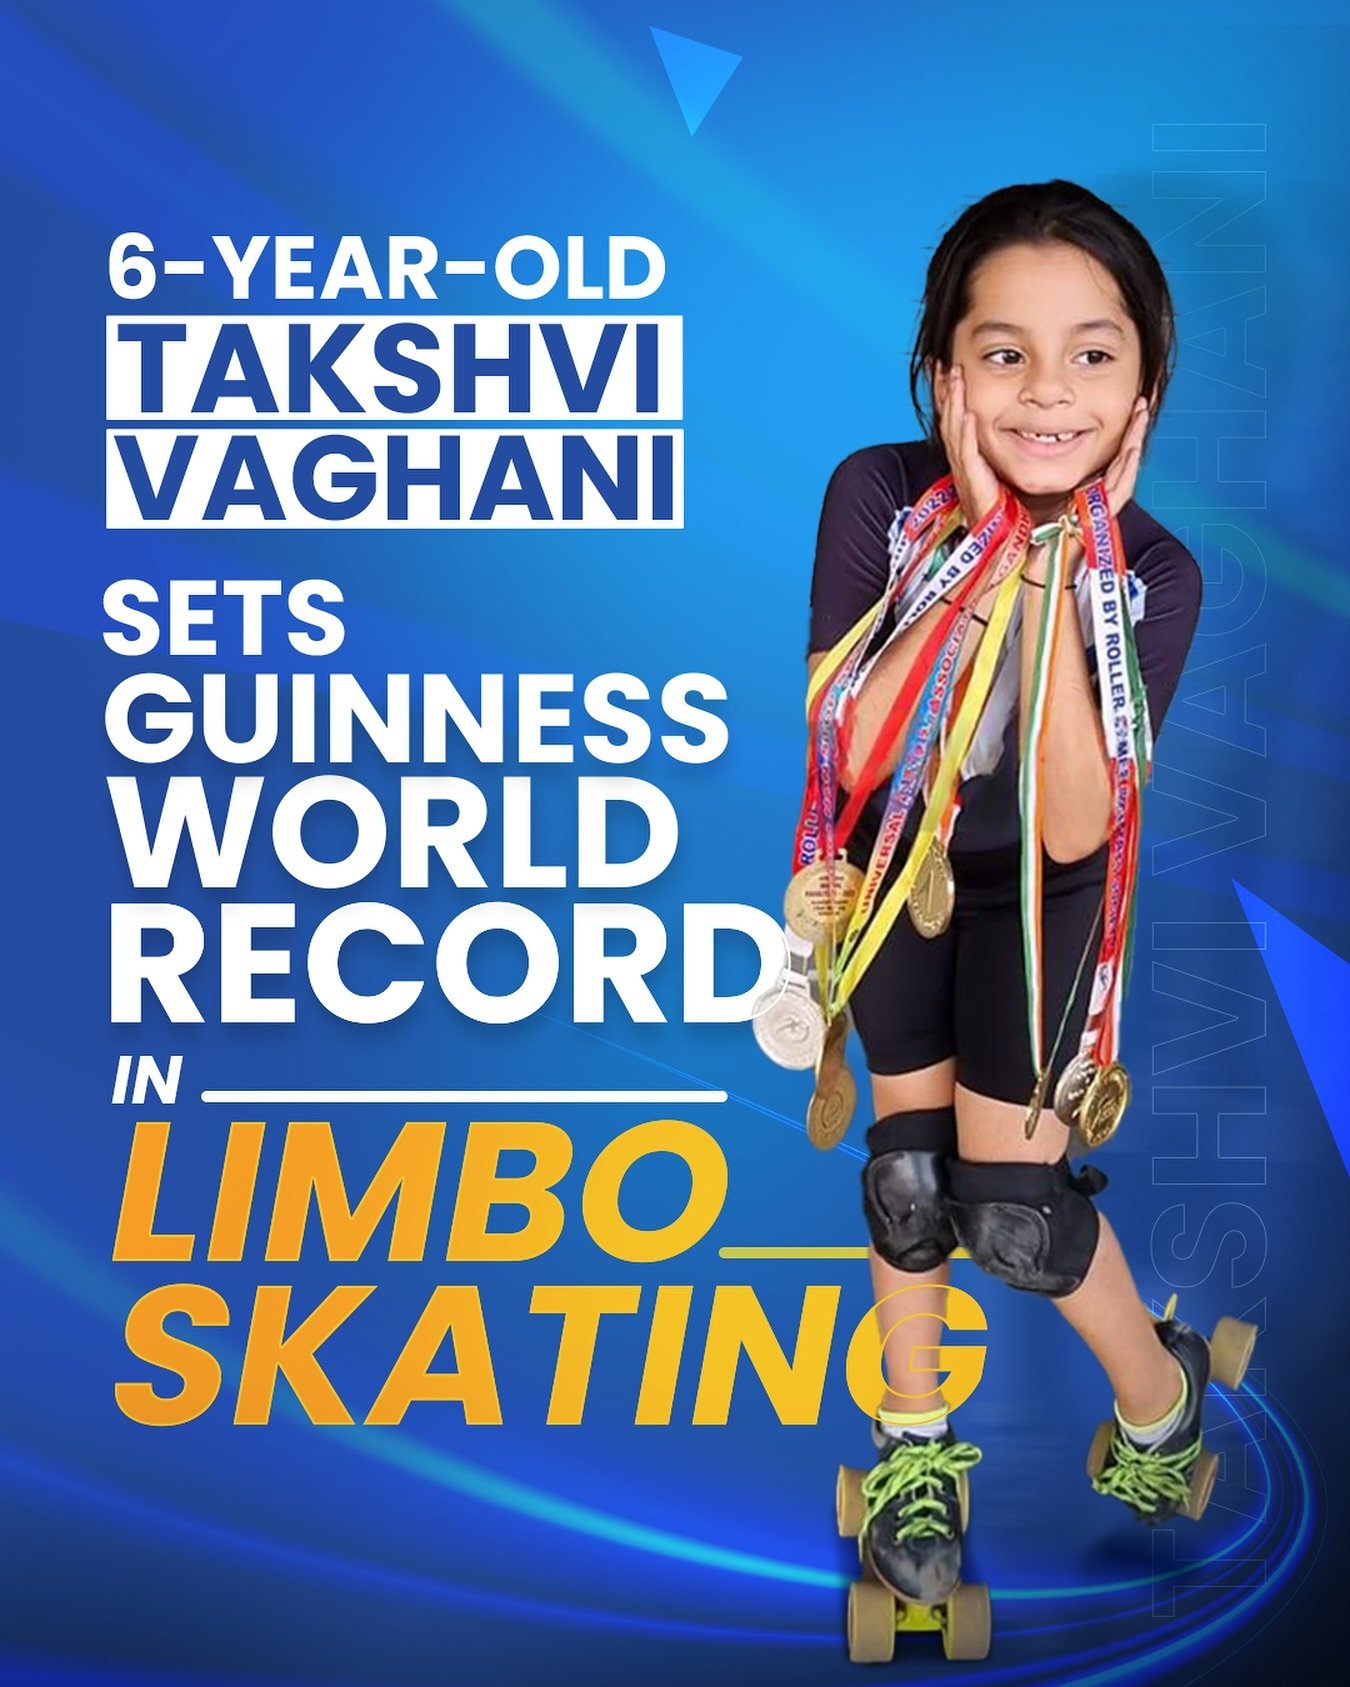 🌟 At just 6 years old, Takshvi Vaghani from Ahmedabad has officially clinched a Guinness World Record in limbo skating, gliding over 25 meters with unmatched skill and determination! 🏆

In the face of this demanding sport, Takshvi's unyielding dedi